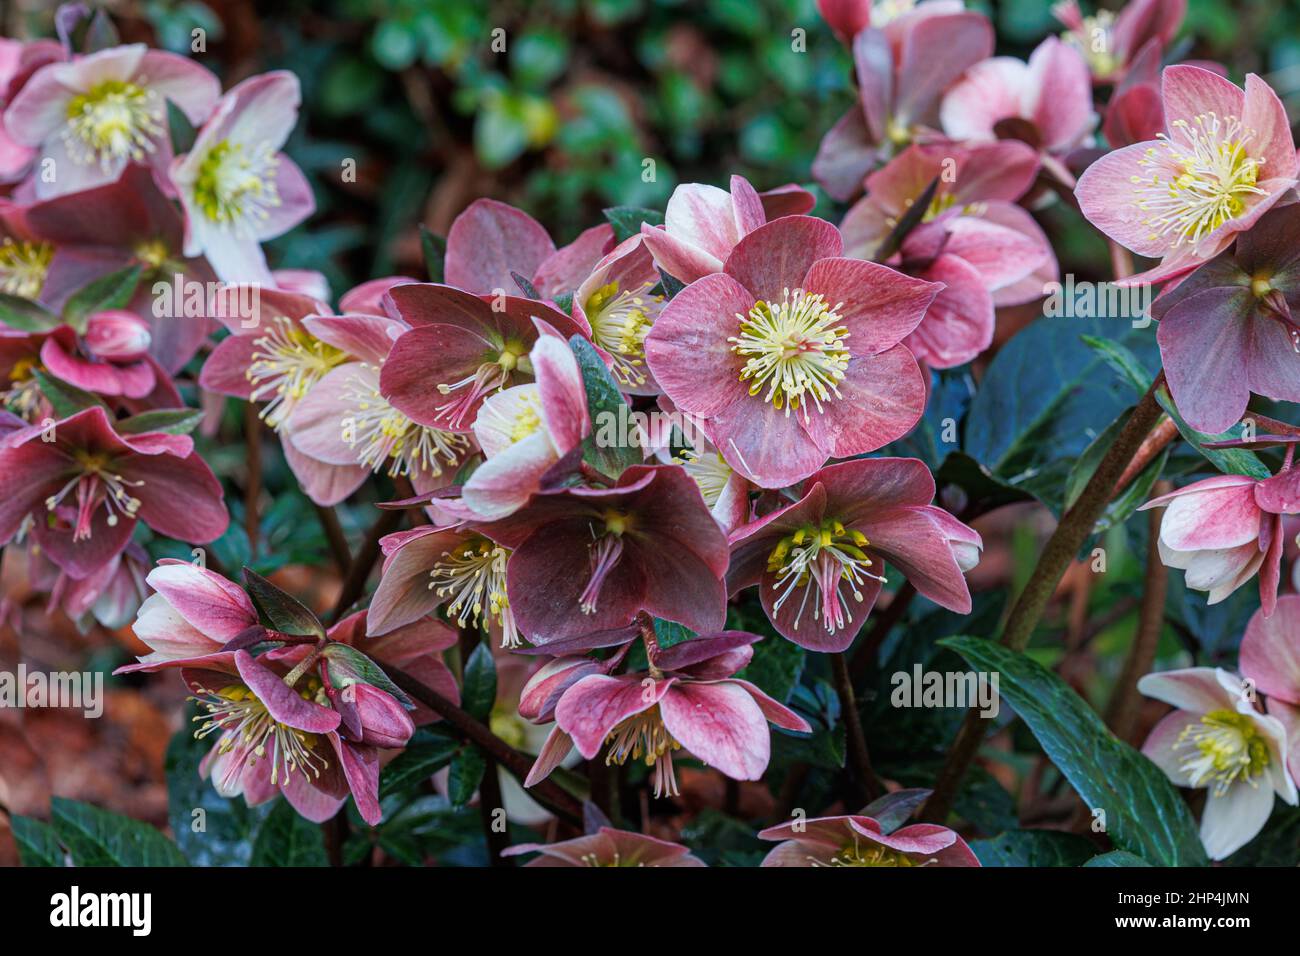 Hellebores from the helleborous gold collection in the photographers garden Stock Photo